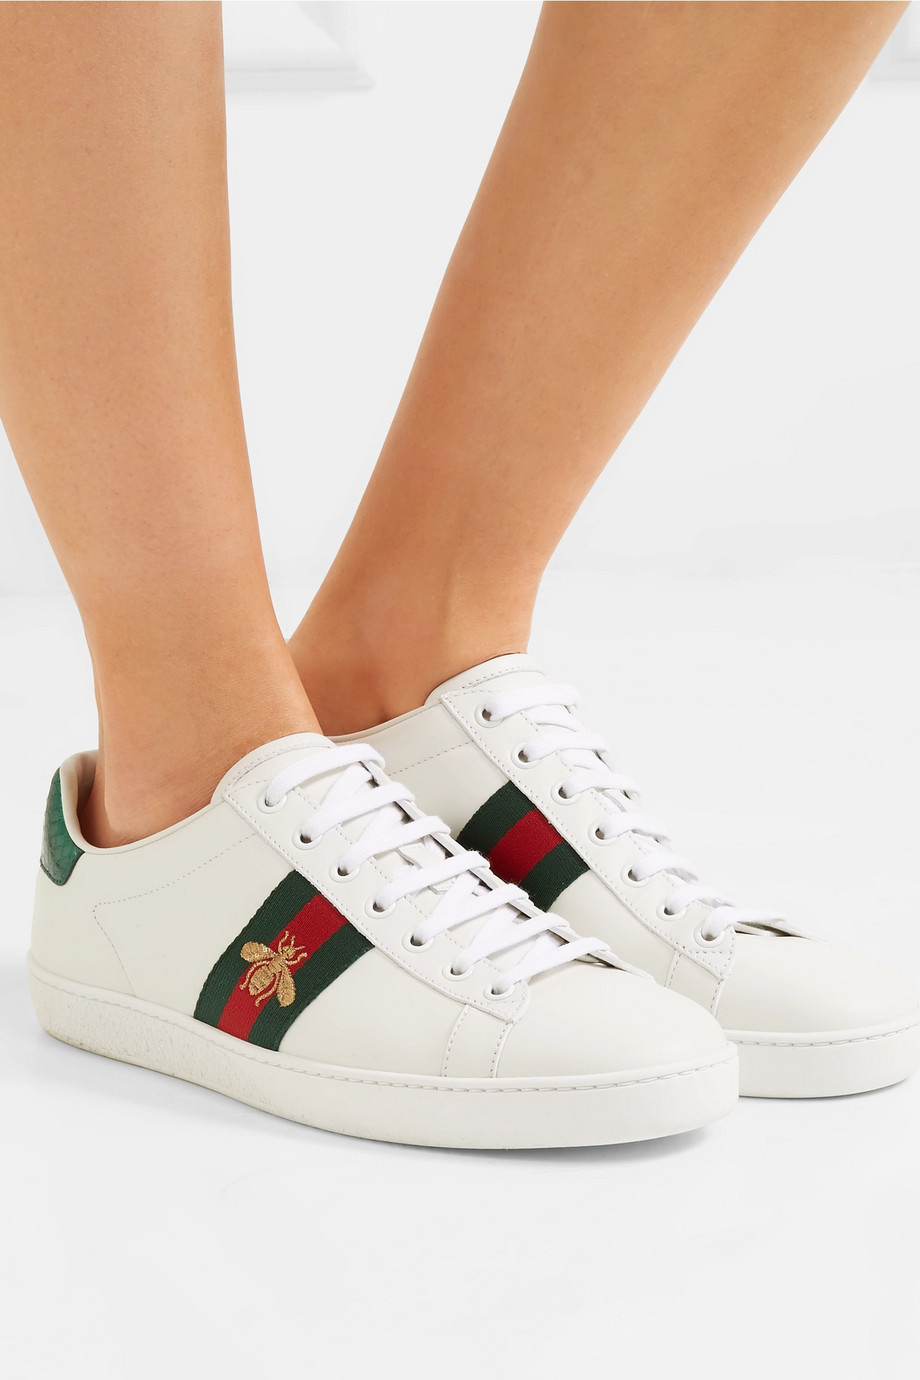 gucci ace sneaker dupe